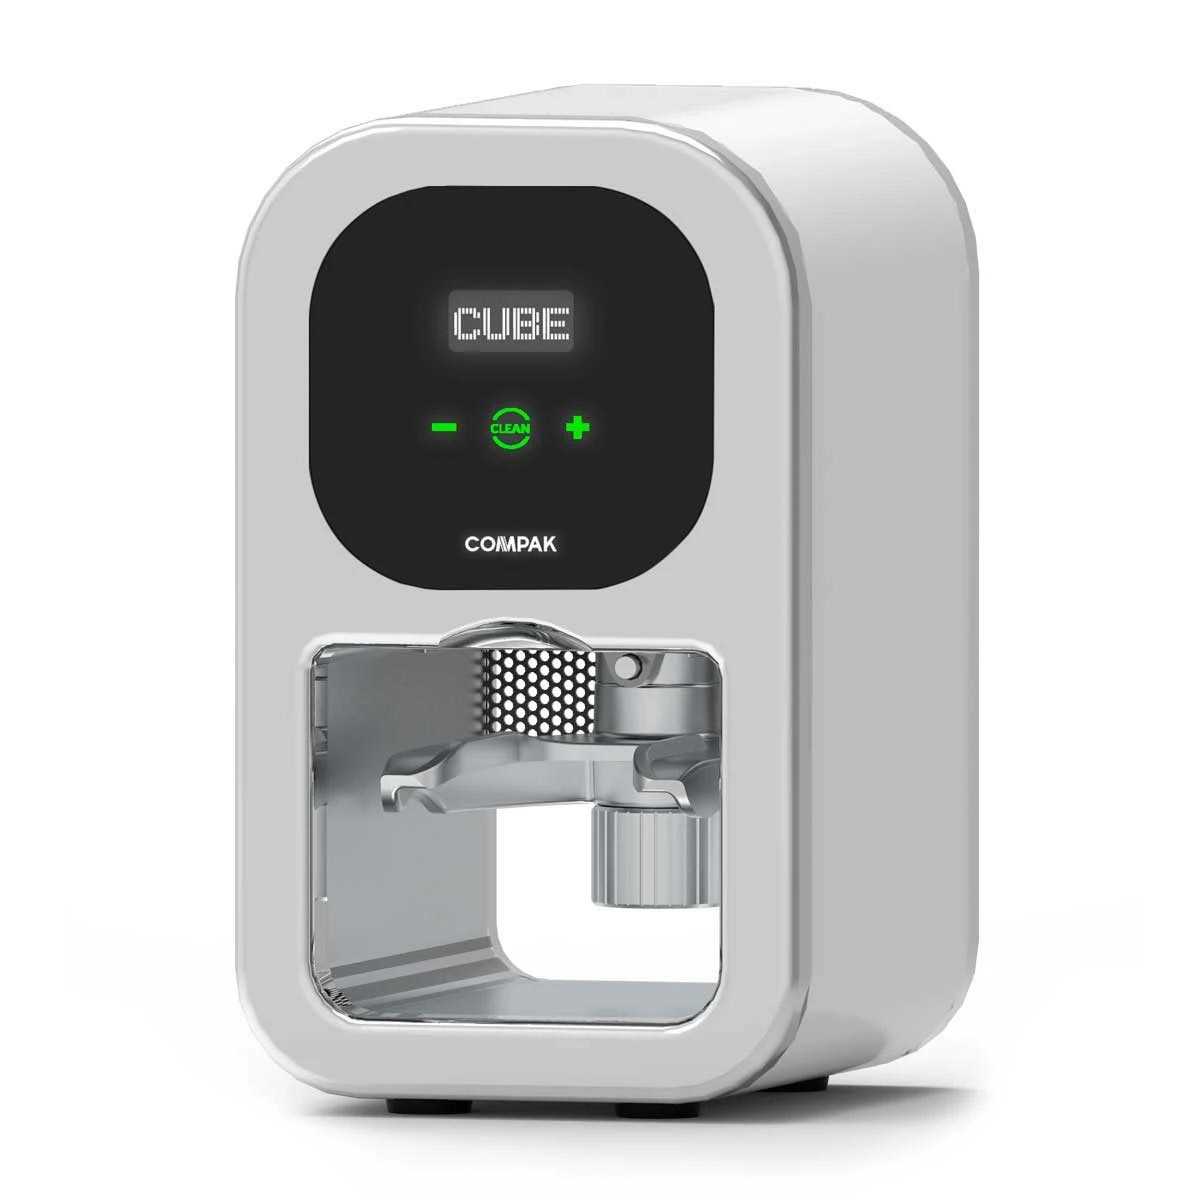 Compak Cube Tamp Electronic Automatic Coffee Tamper Press - White